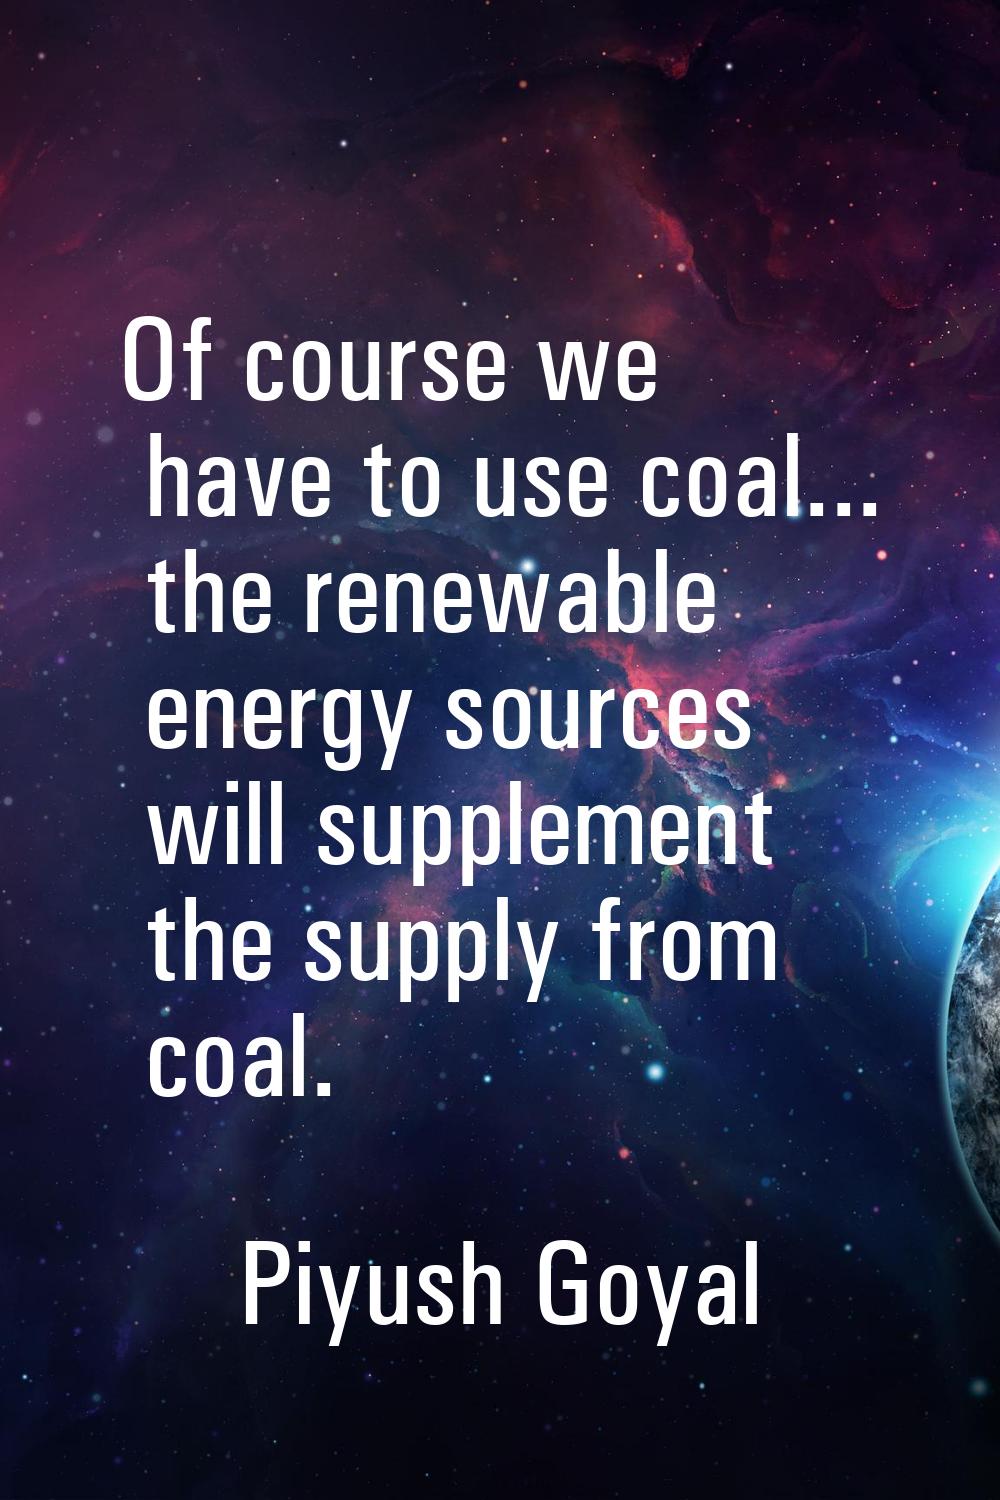 Of course we have to use coal... the renewable energy sources will supplement the supply from coal.